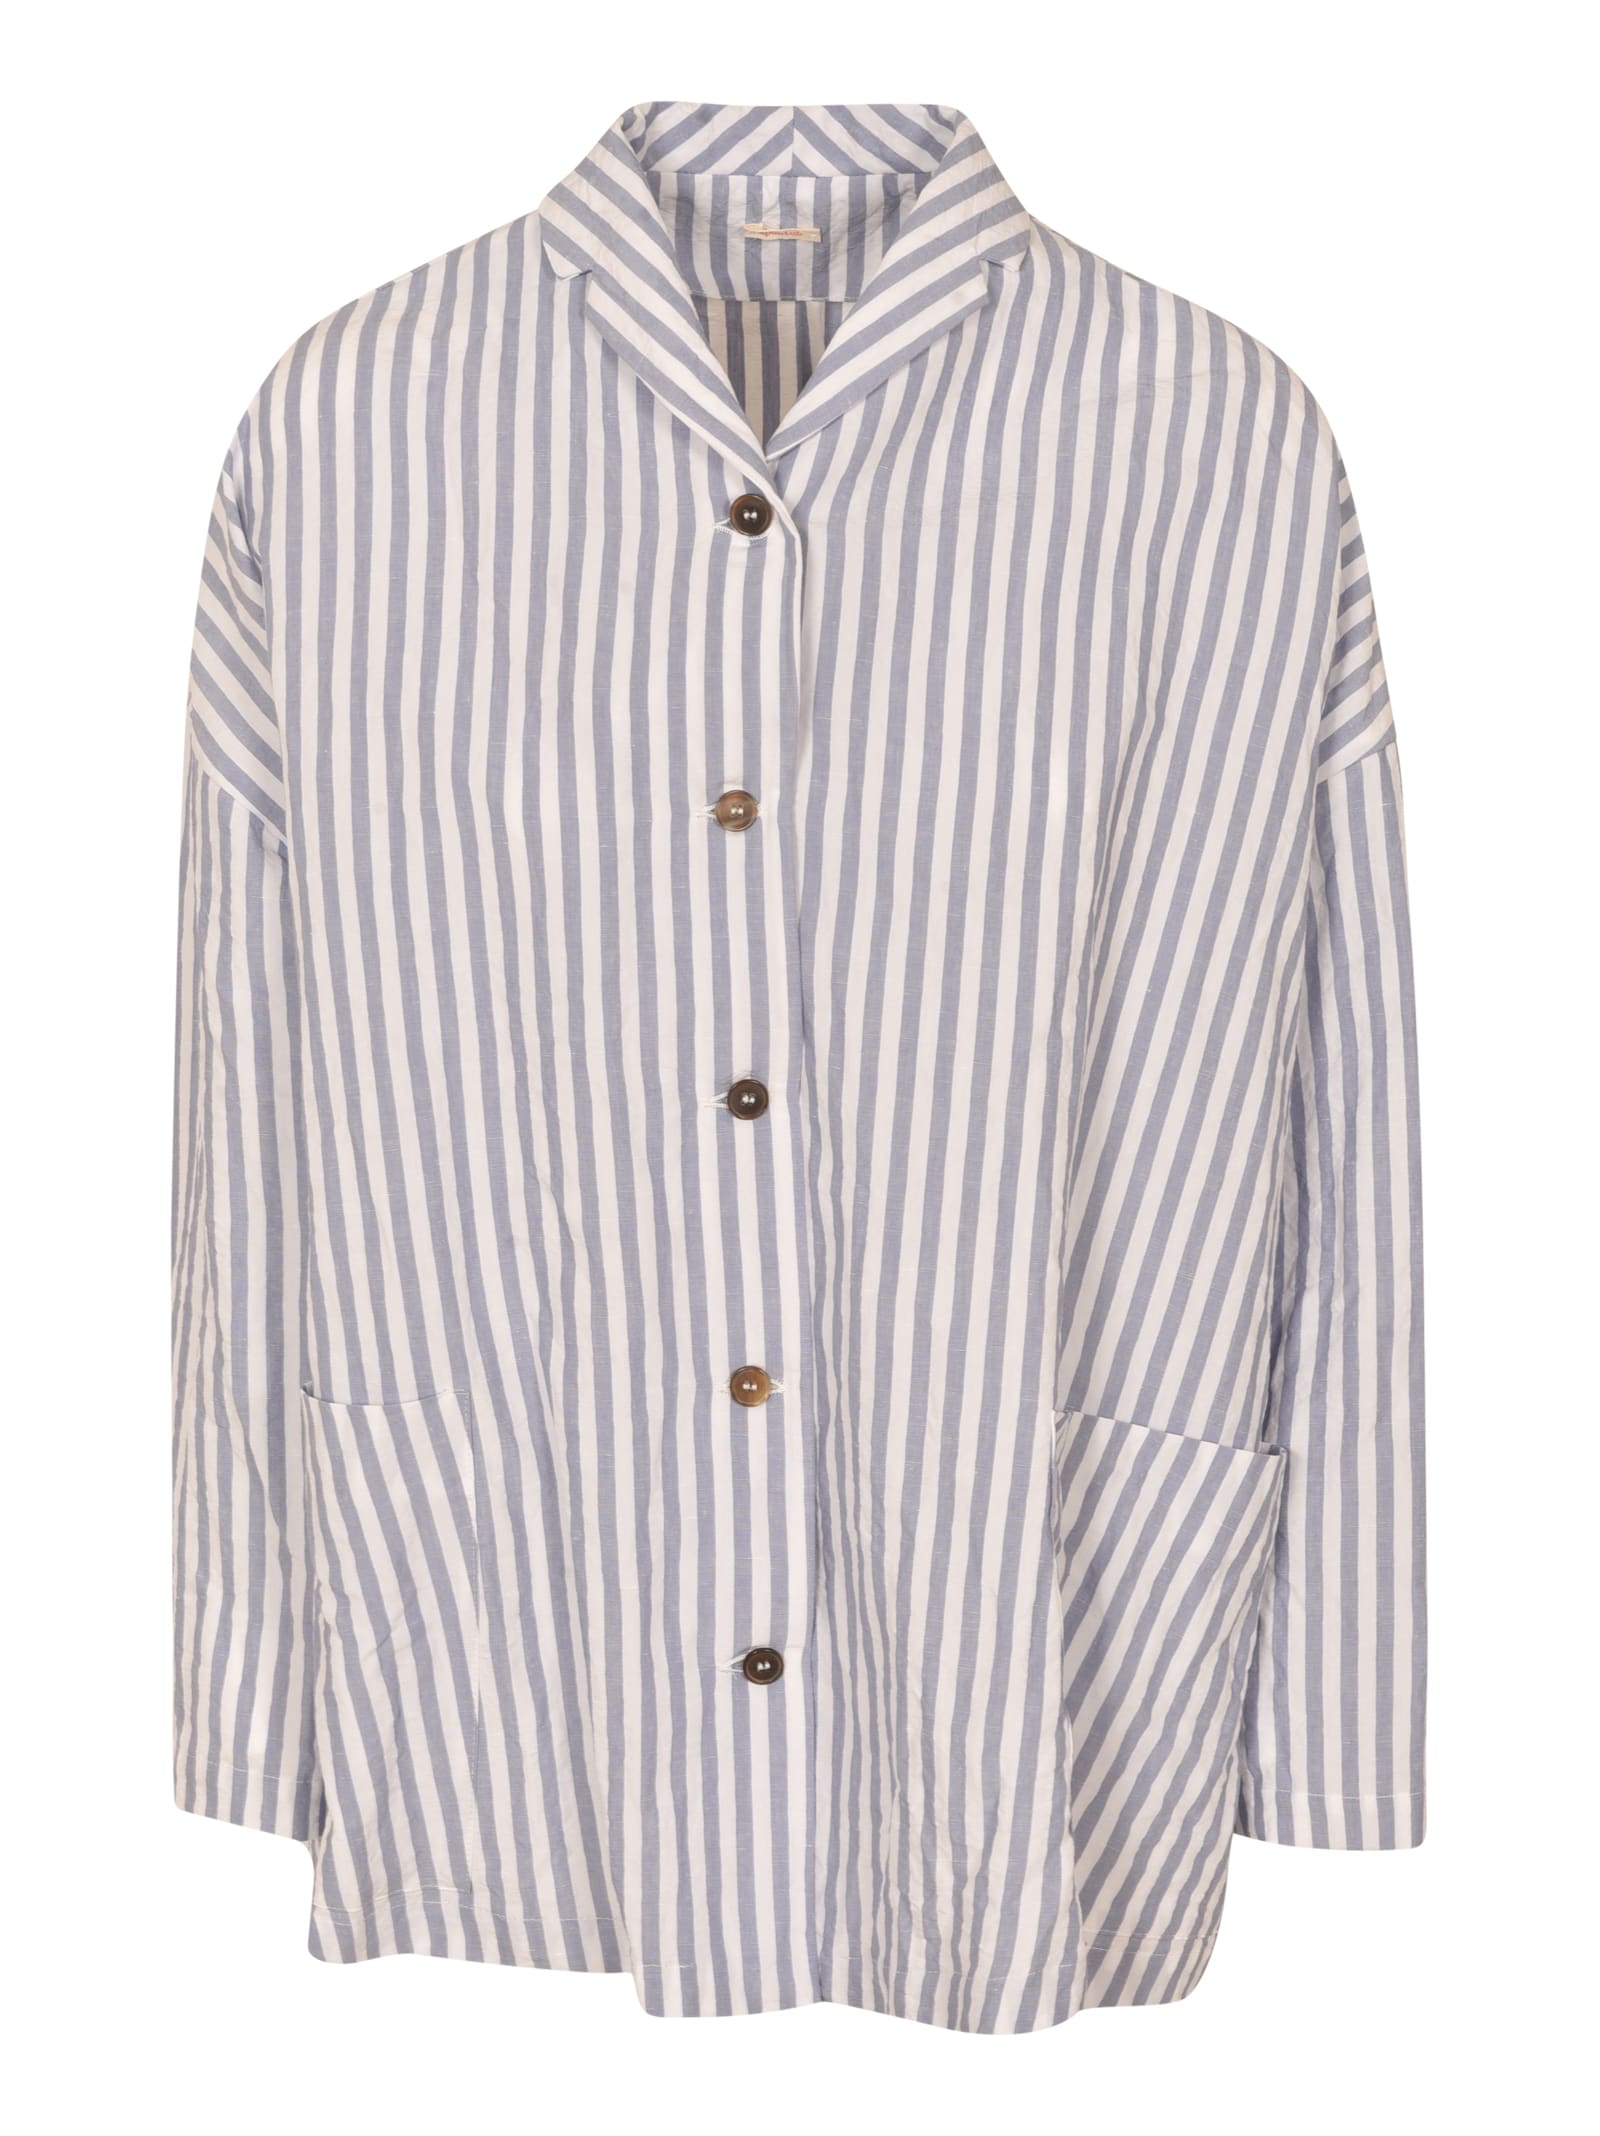 A Punto B Loose Fit Striped Shirt In White